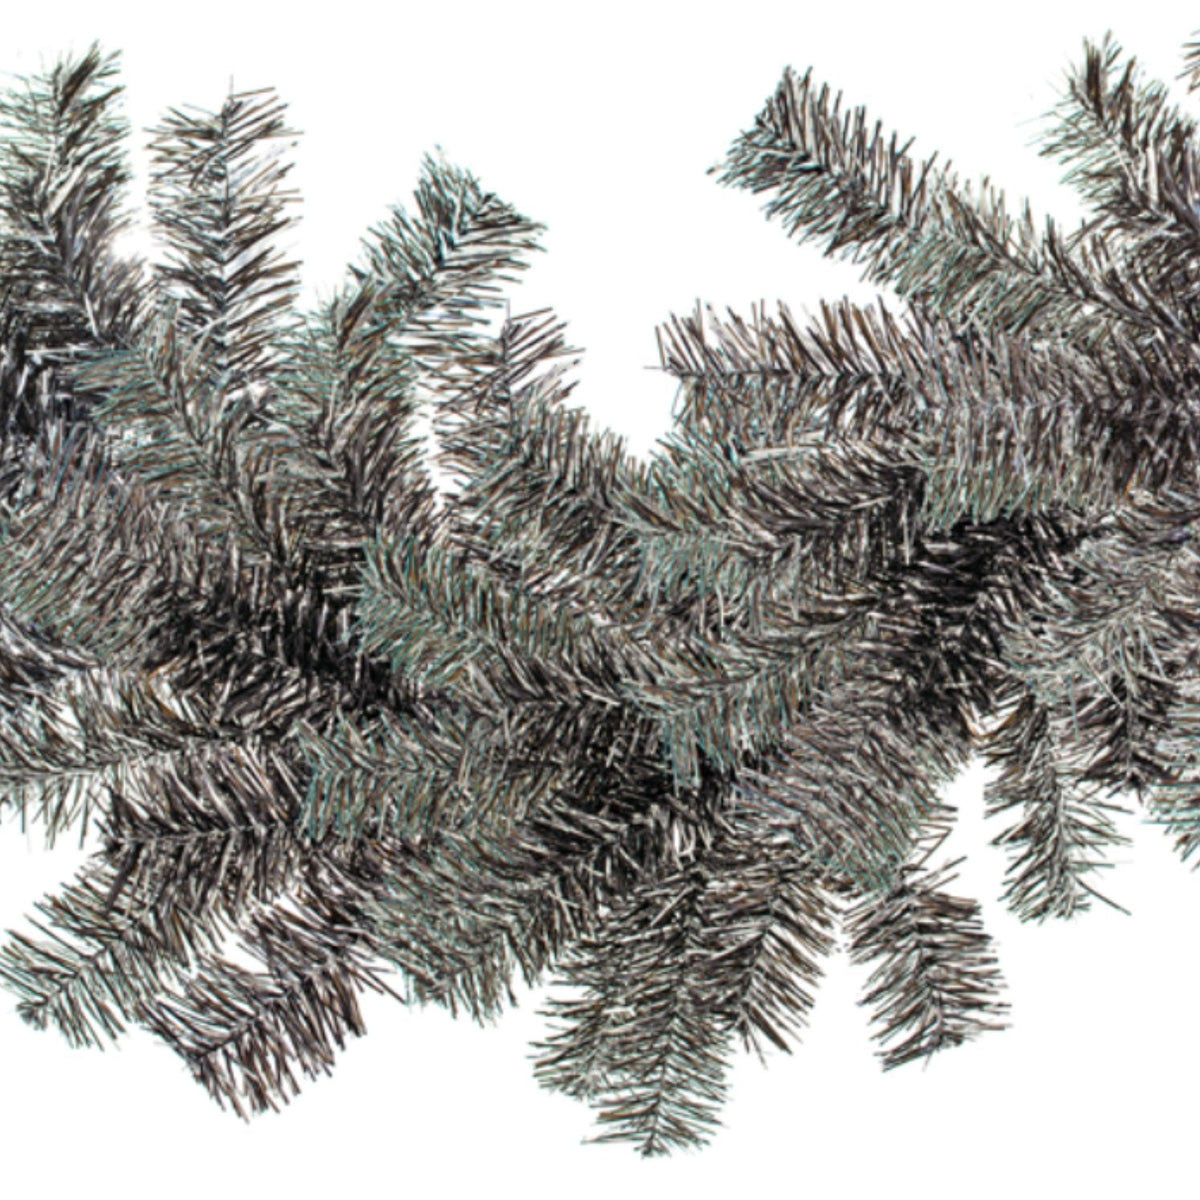 Middle 6ft Black and Silver Christmas Brush Garland is made in the USA.  Available for sale at leedisplay.com